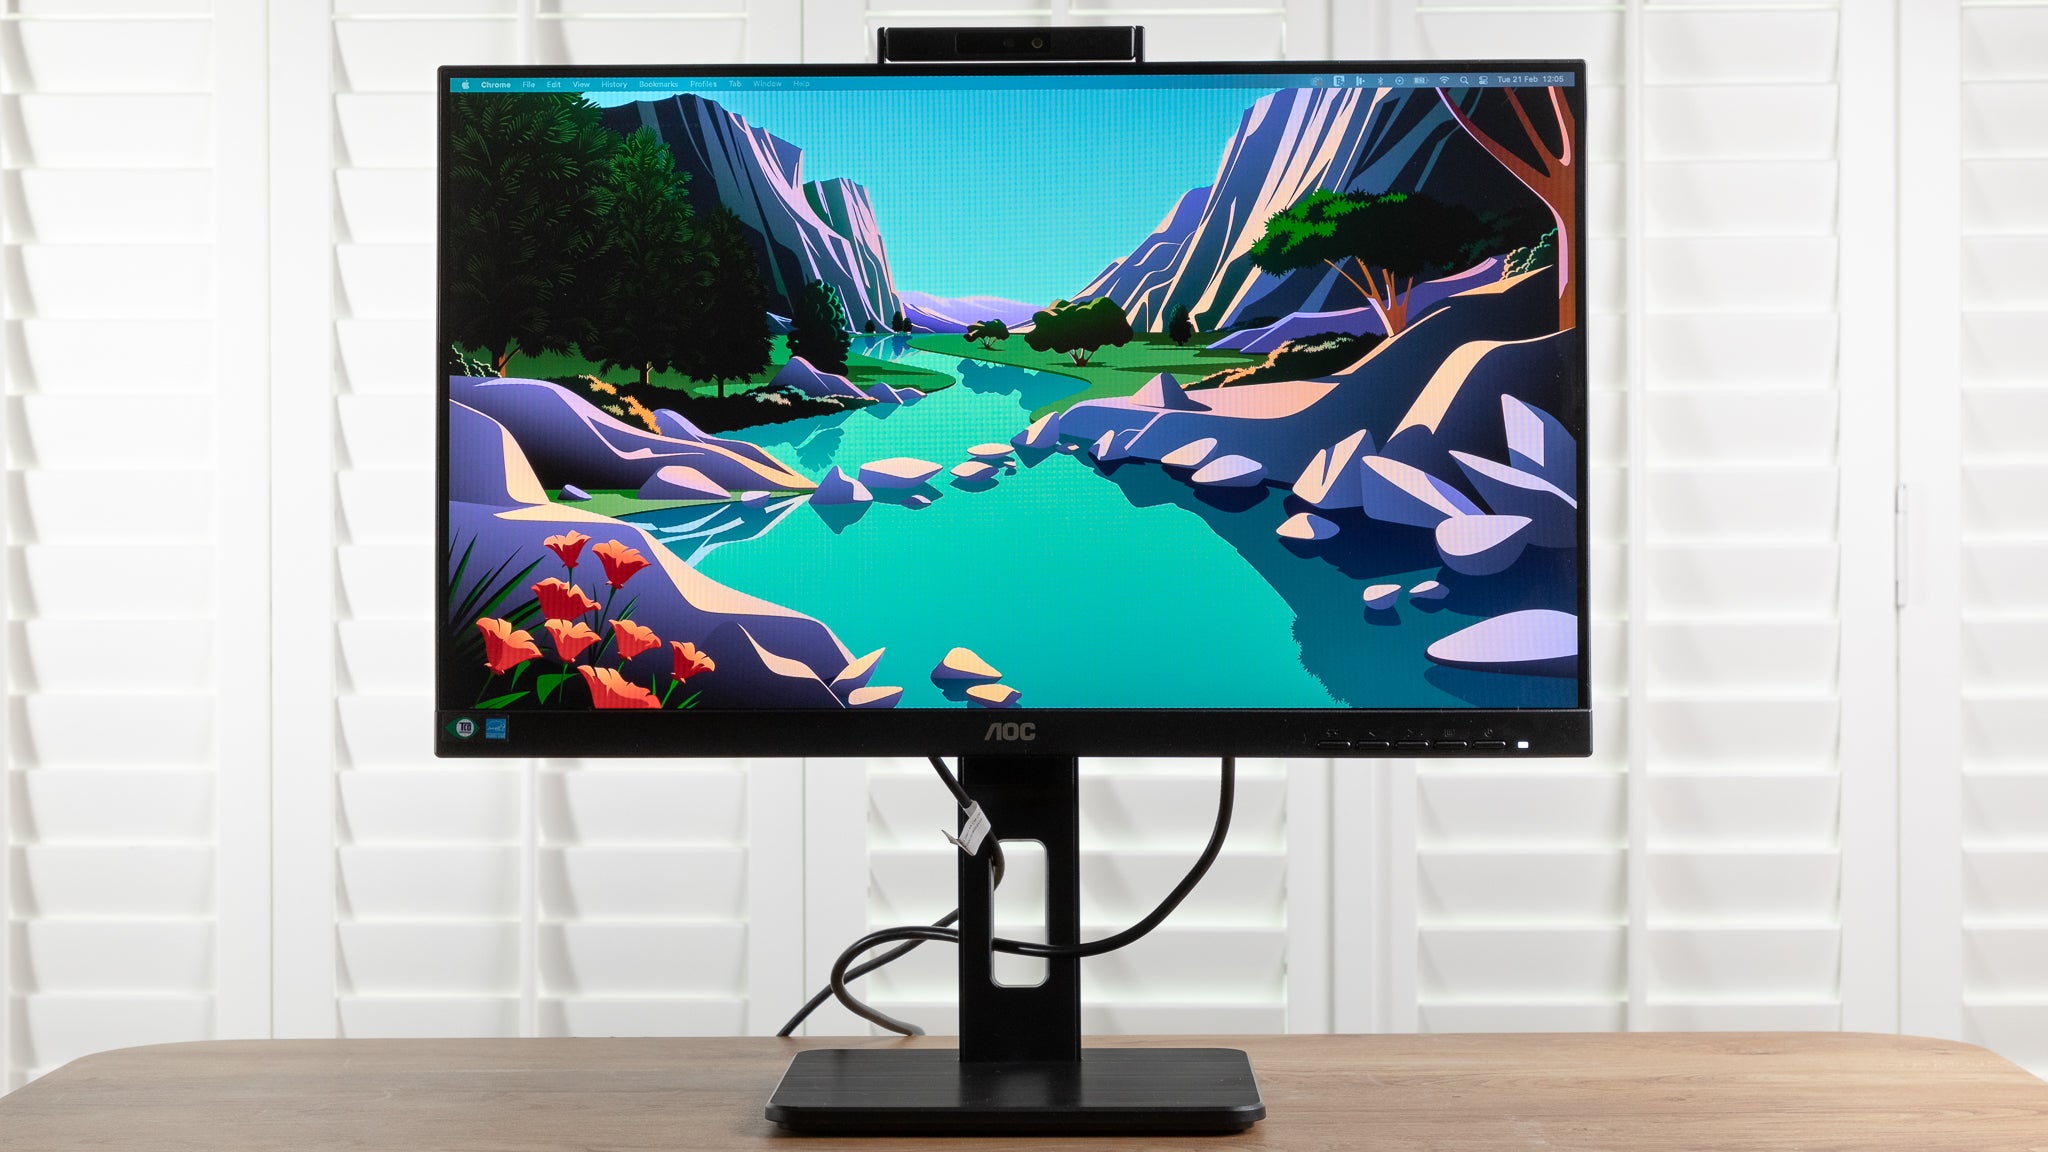 How To Reset An AOC Monitor